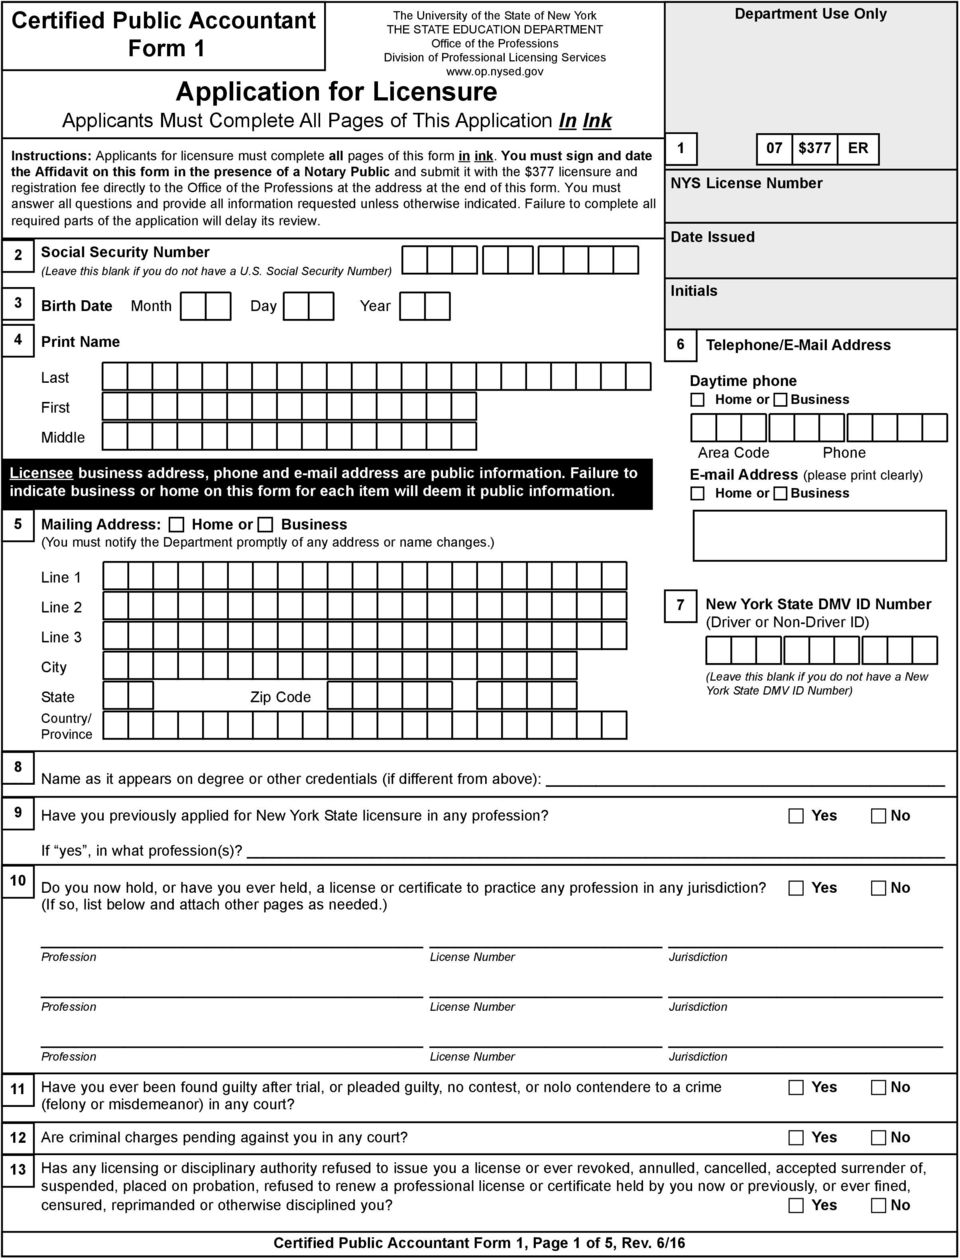 You must sign and date the Affidavit on this form in the presence of a Notary Public and submit it with the $377 licensure and registration fee directly to the Office of the Professions at the